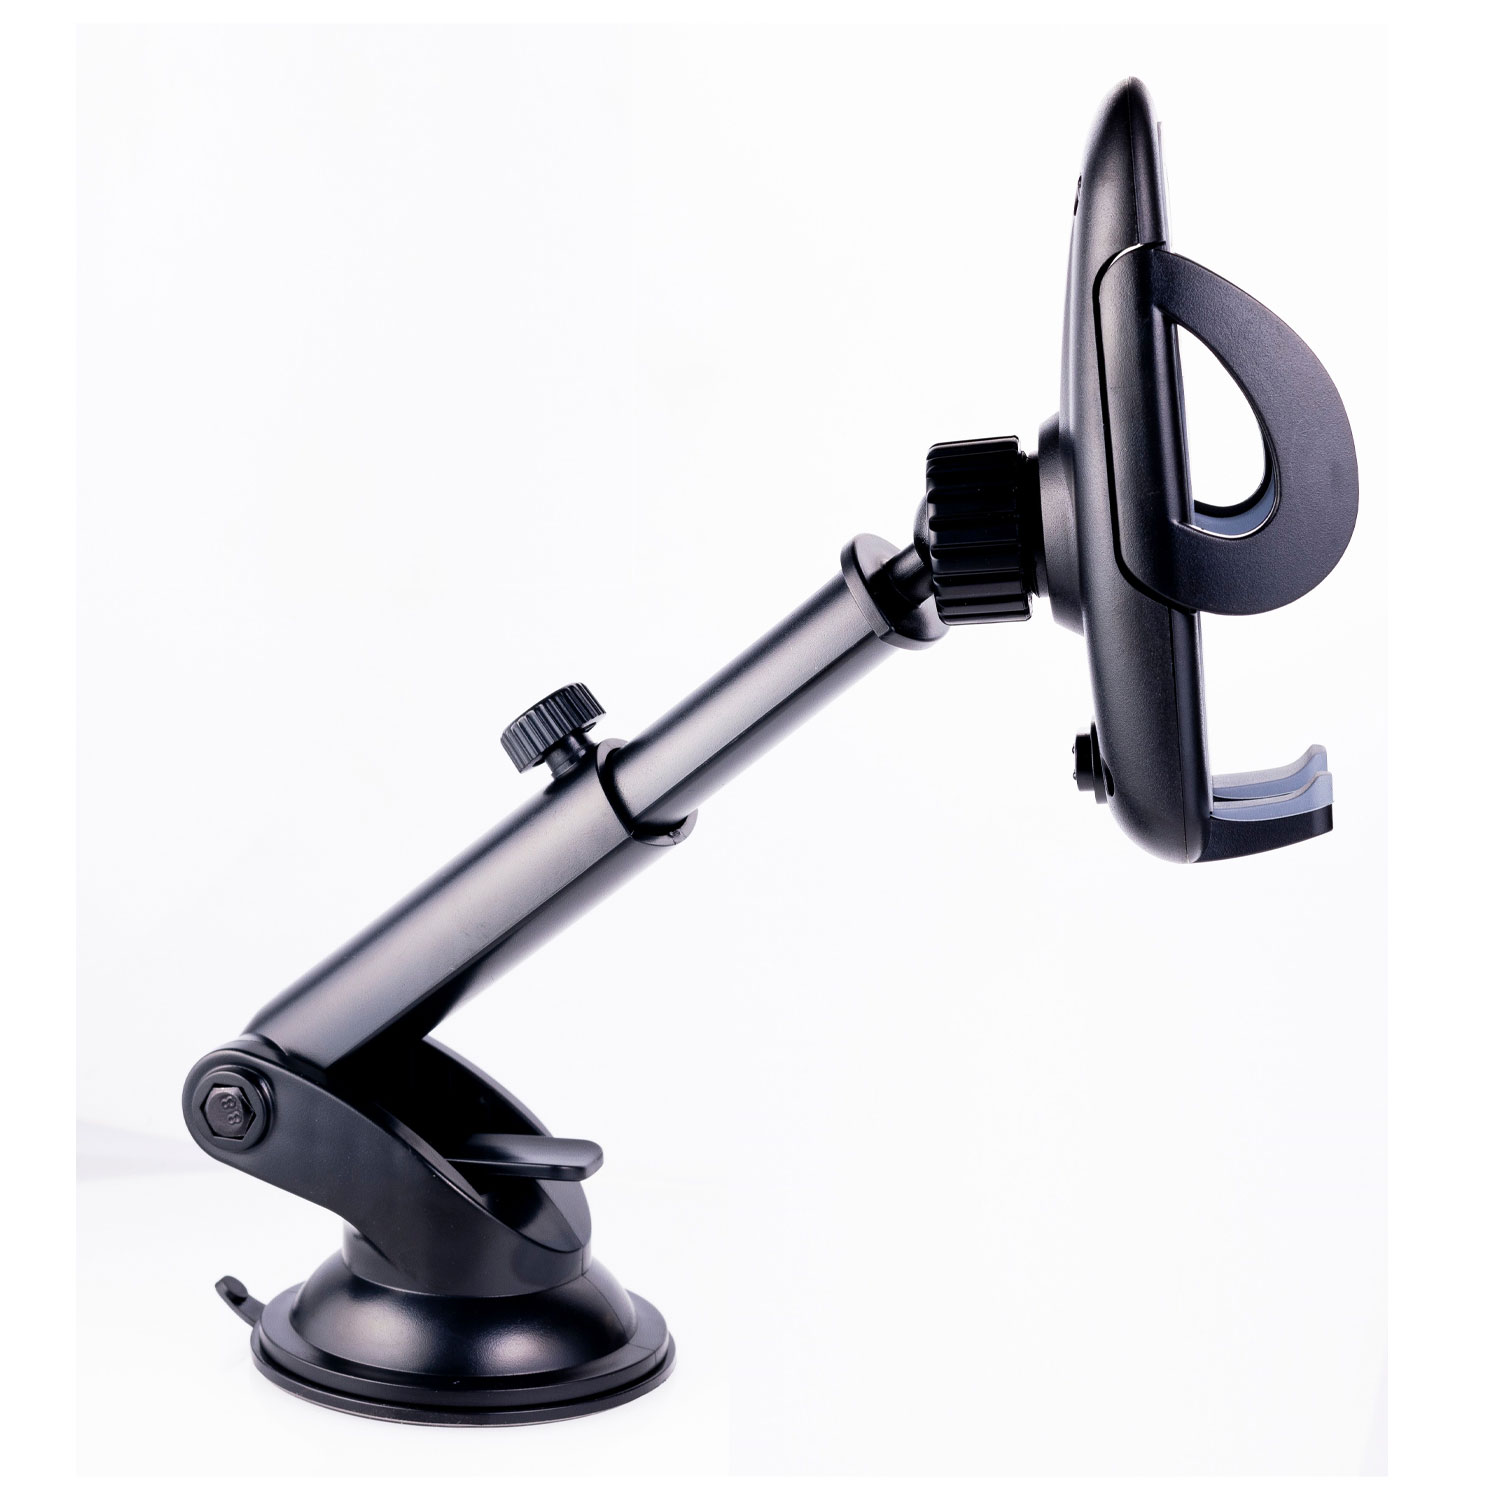 DGN Universal Strong Car Mount for Mobile Phones And Smartphones